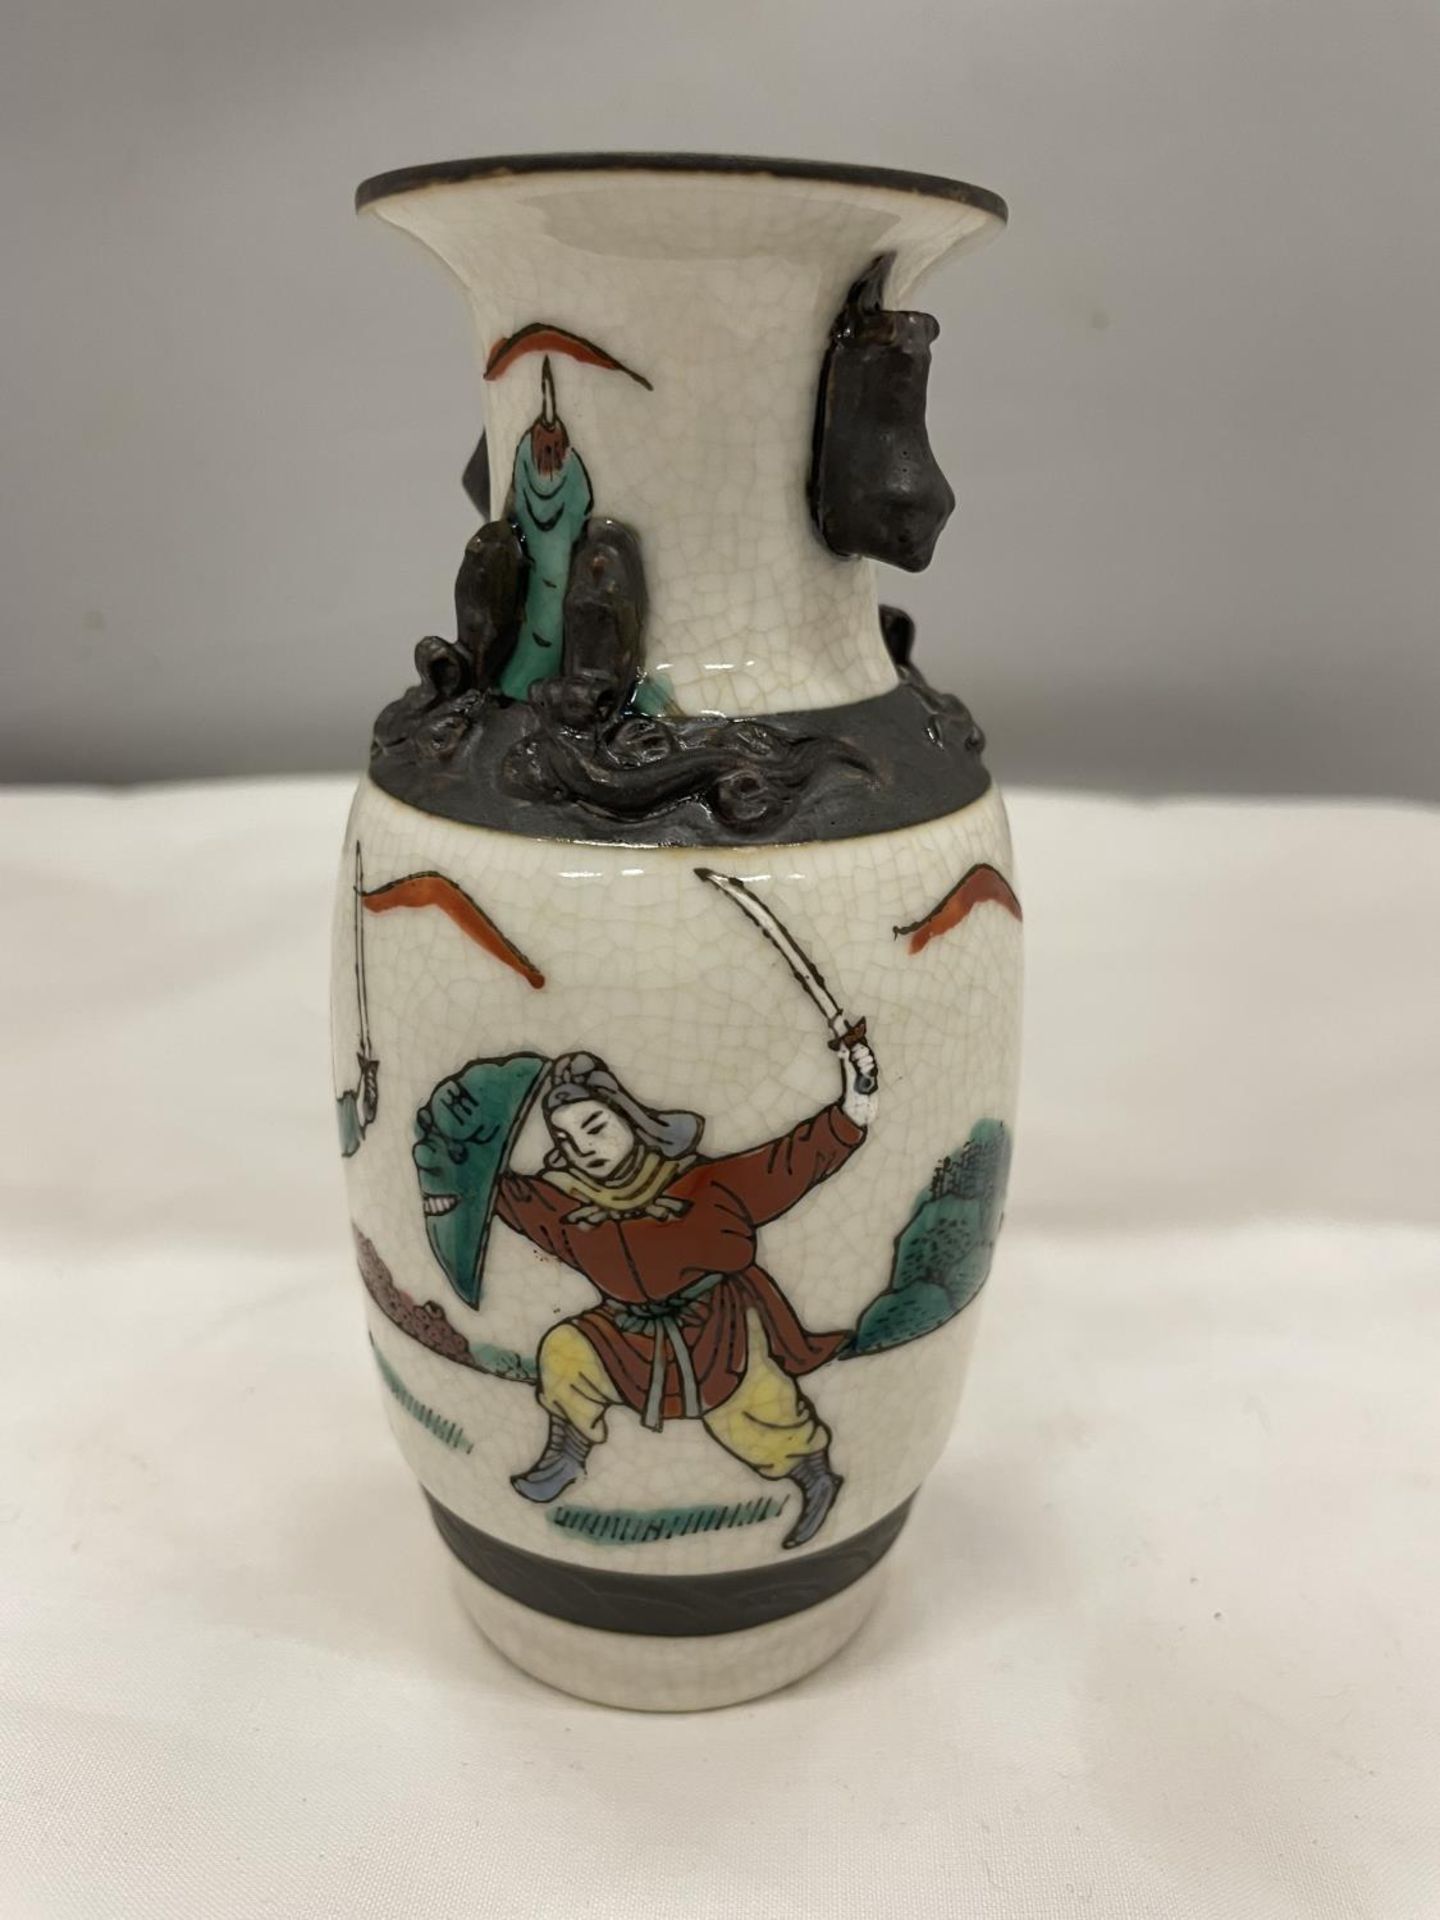 A CRACKLE GLAZE CHINESE VASE DEPICTING WARRIORS IN BATTLE